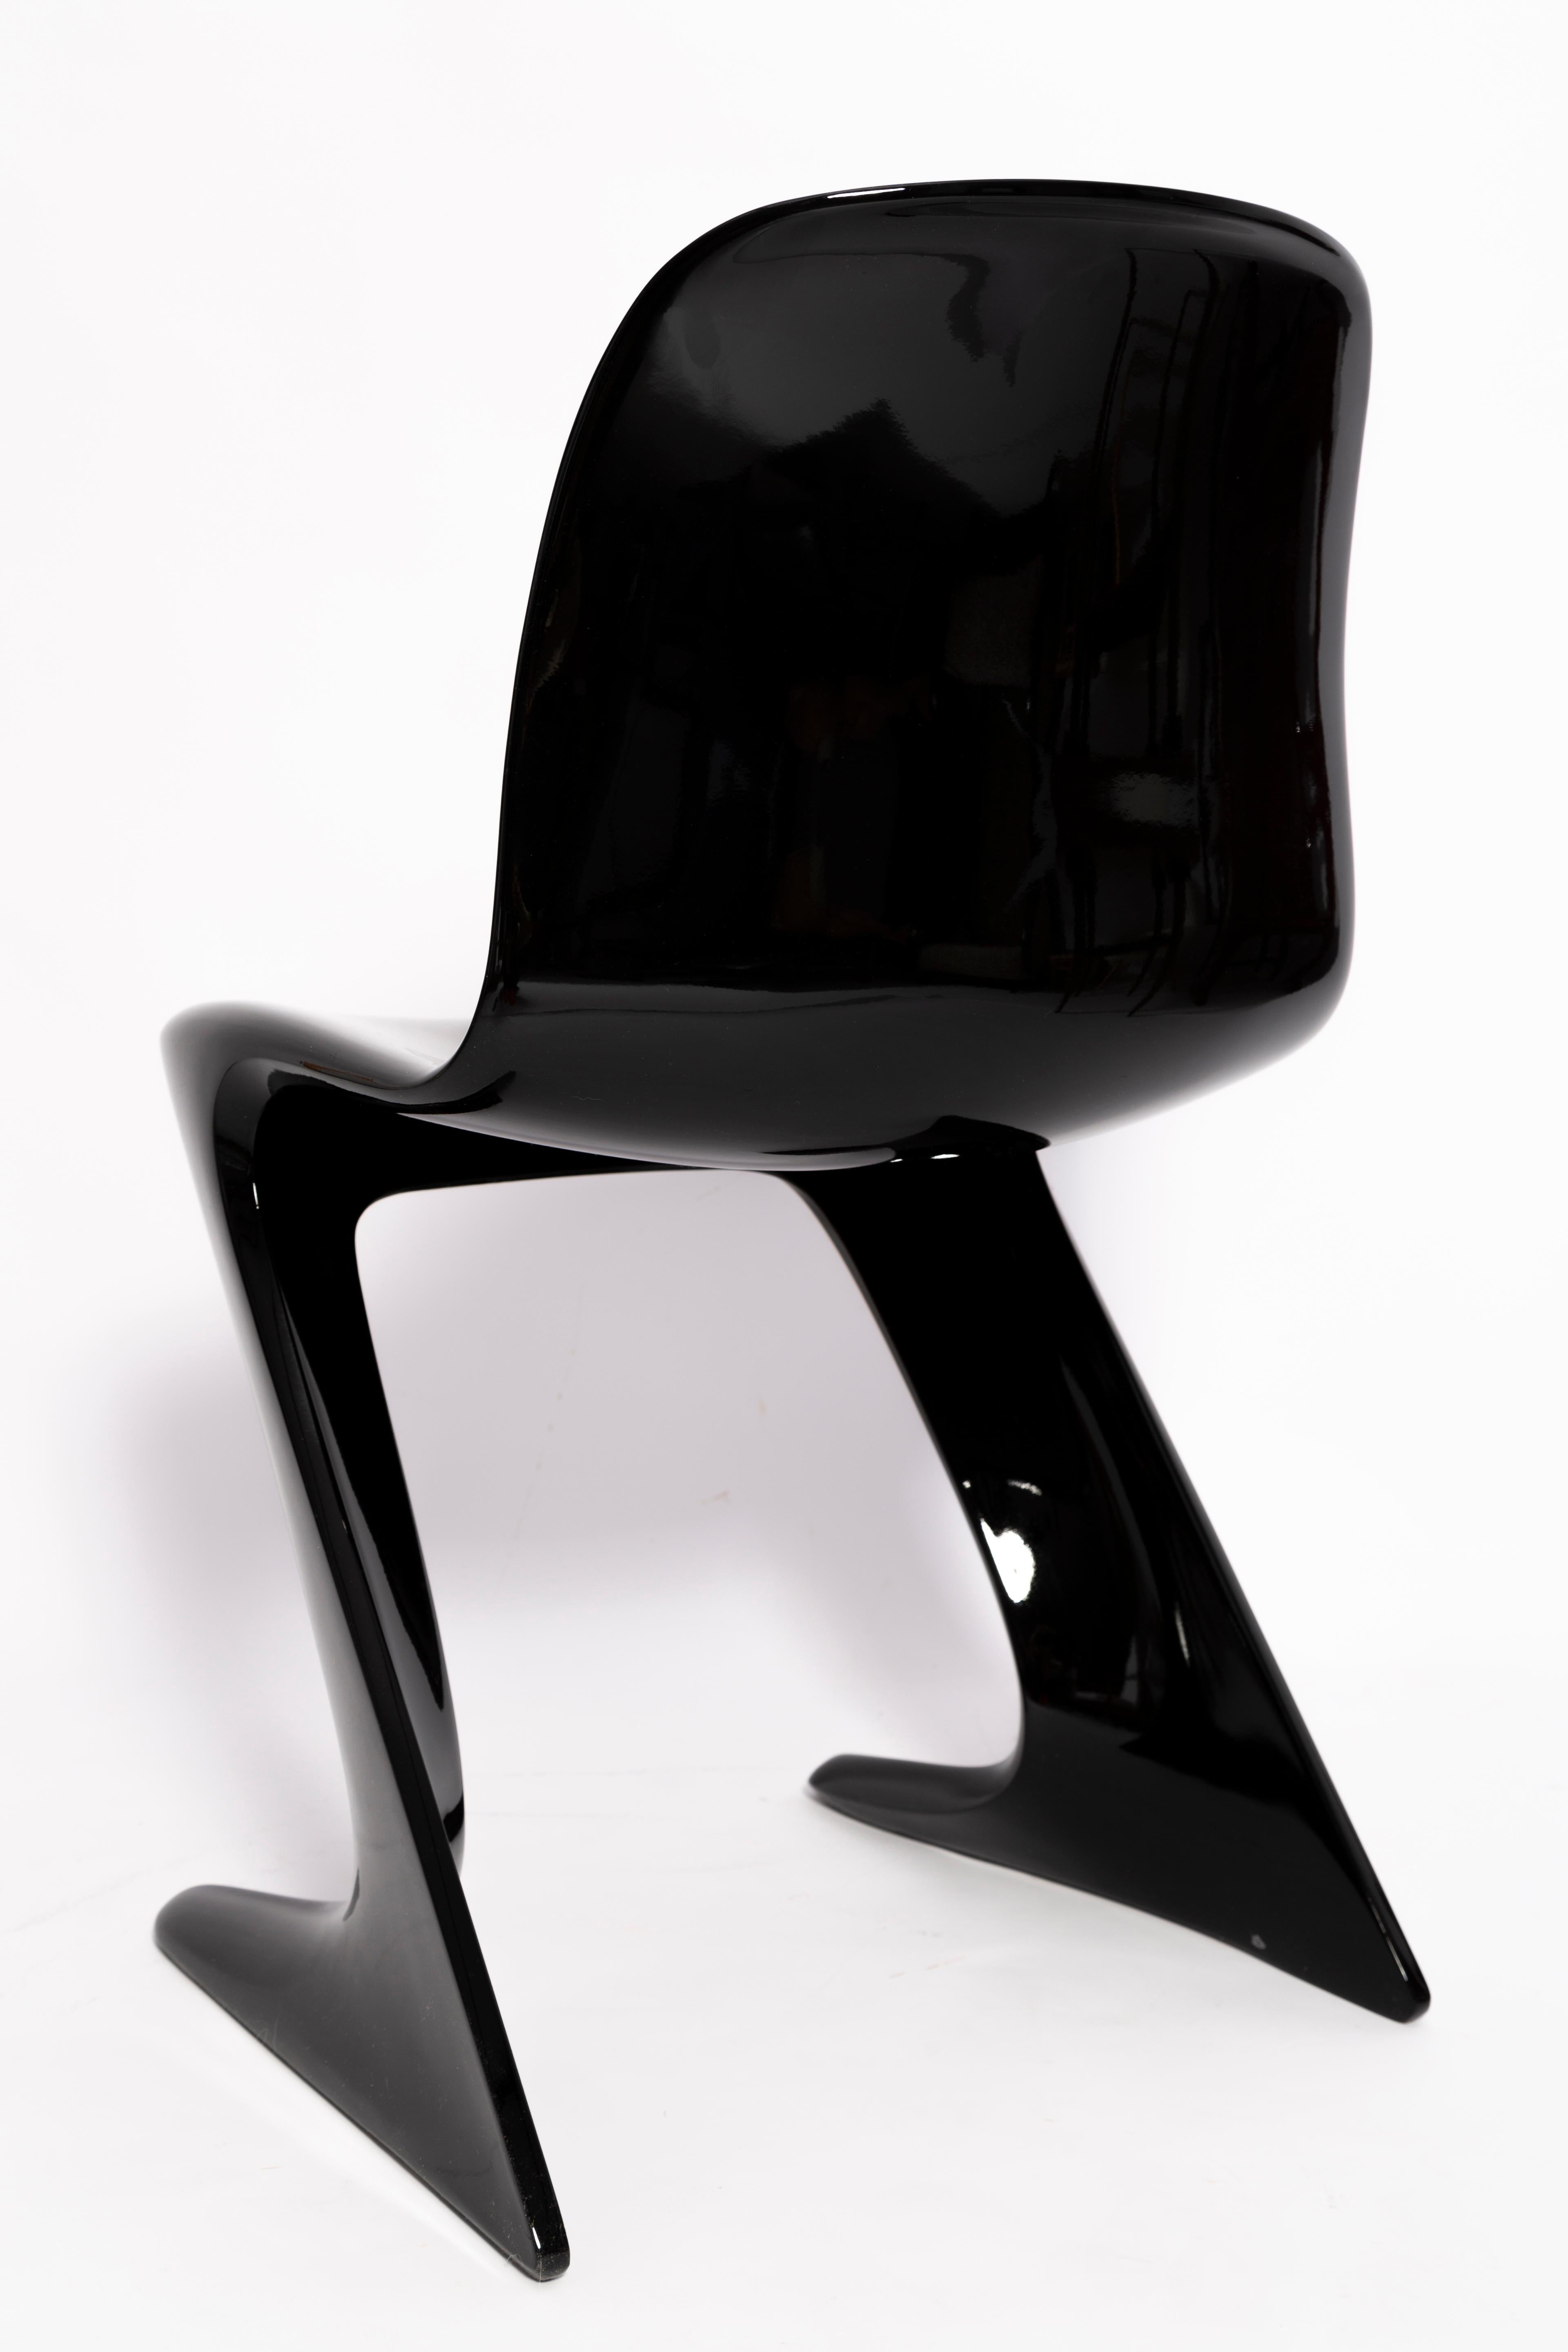 Fiberglass Mid Century Black Glossy Kangaroo Chair Designed by Ernst Moeckl, Germany, 1960s For Sale